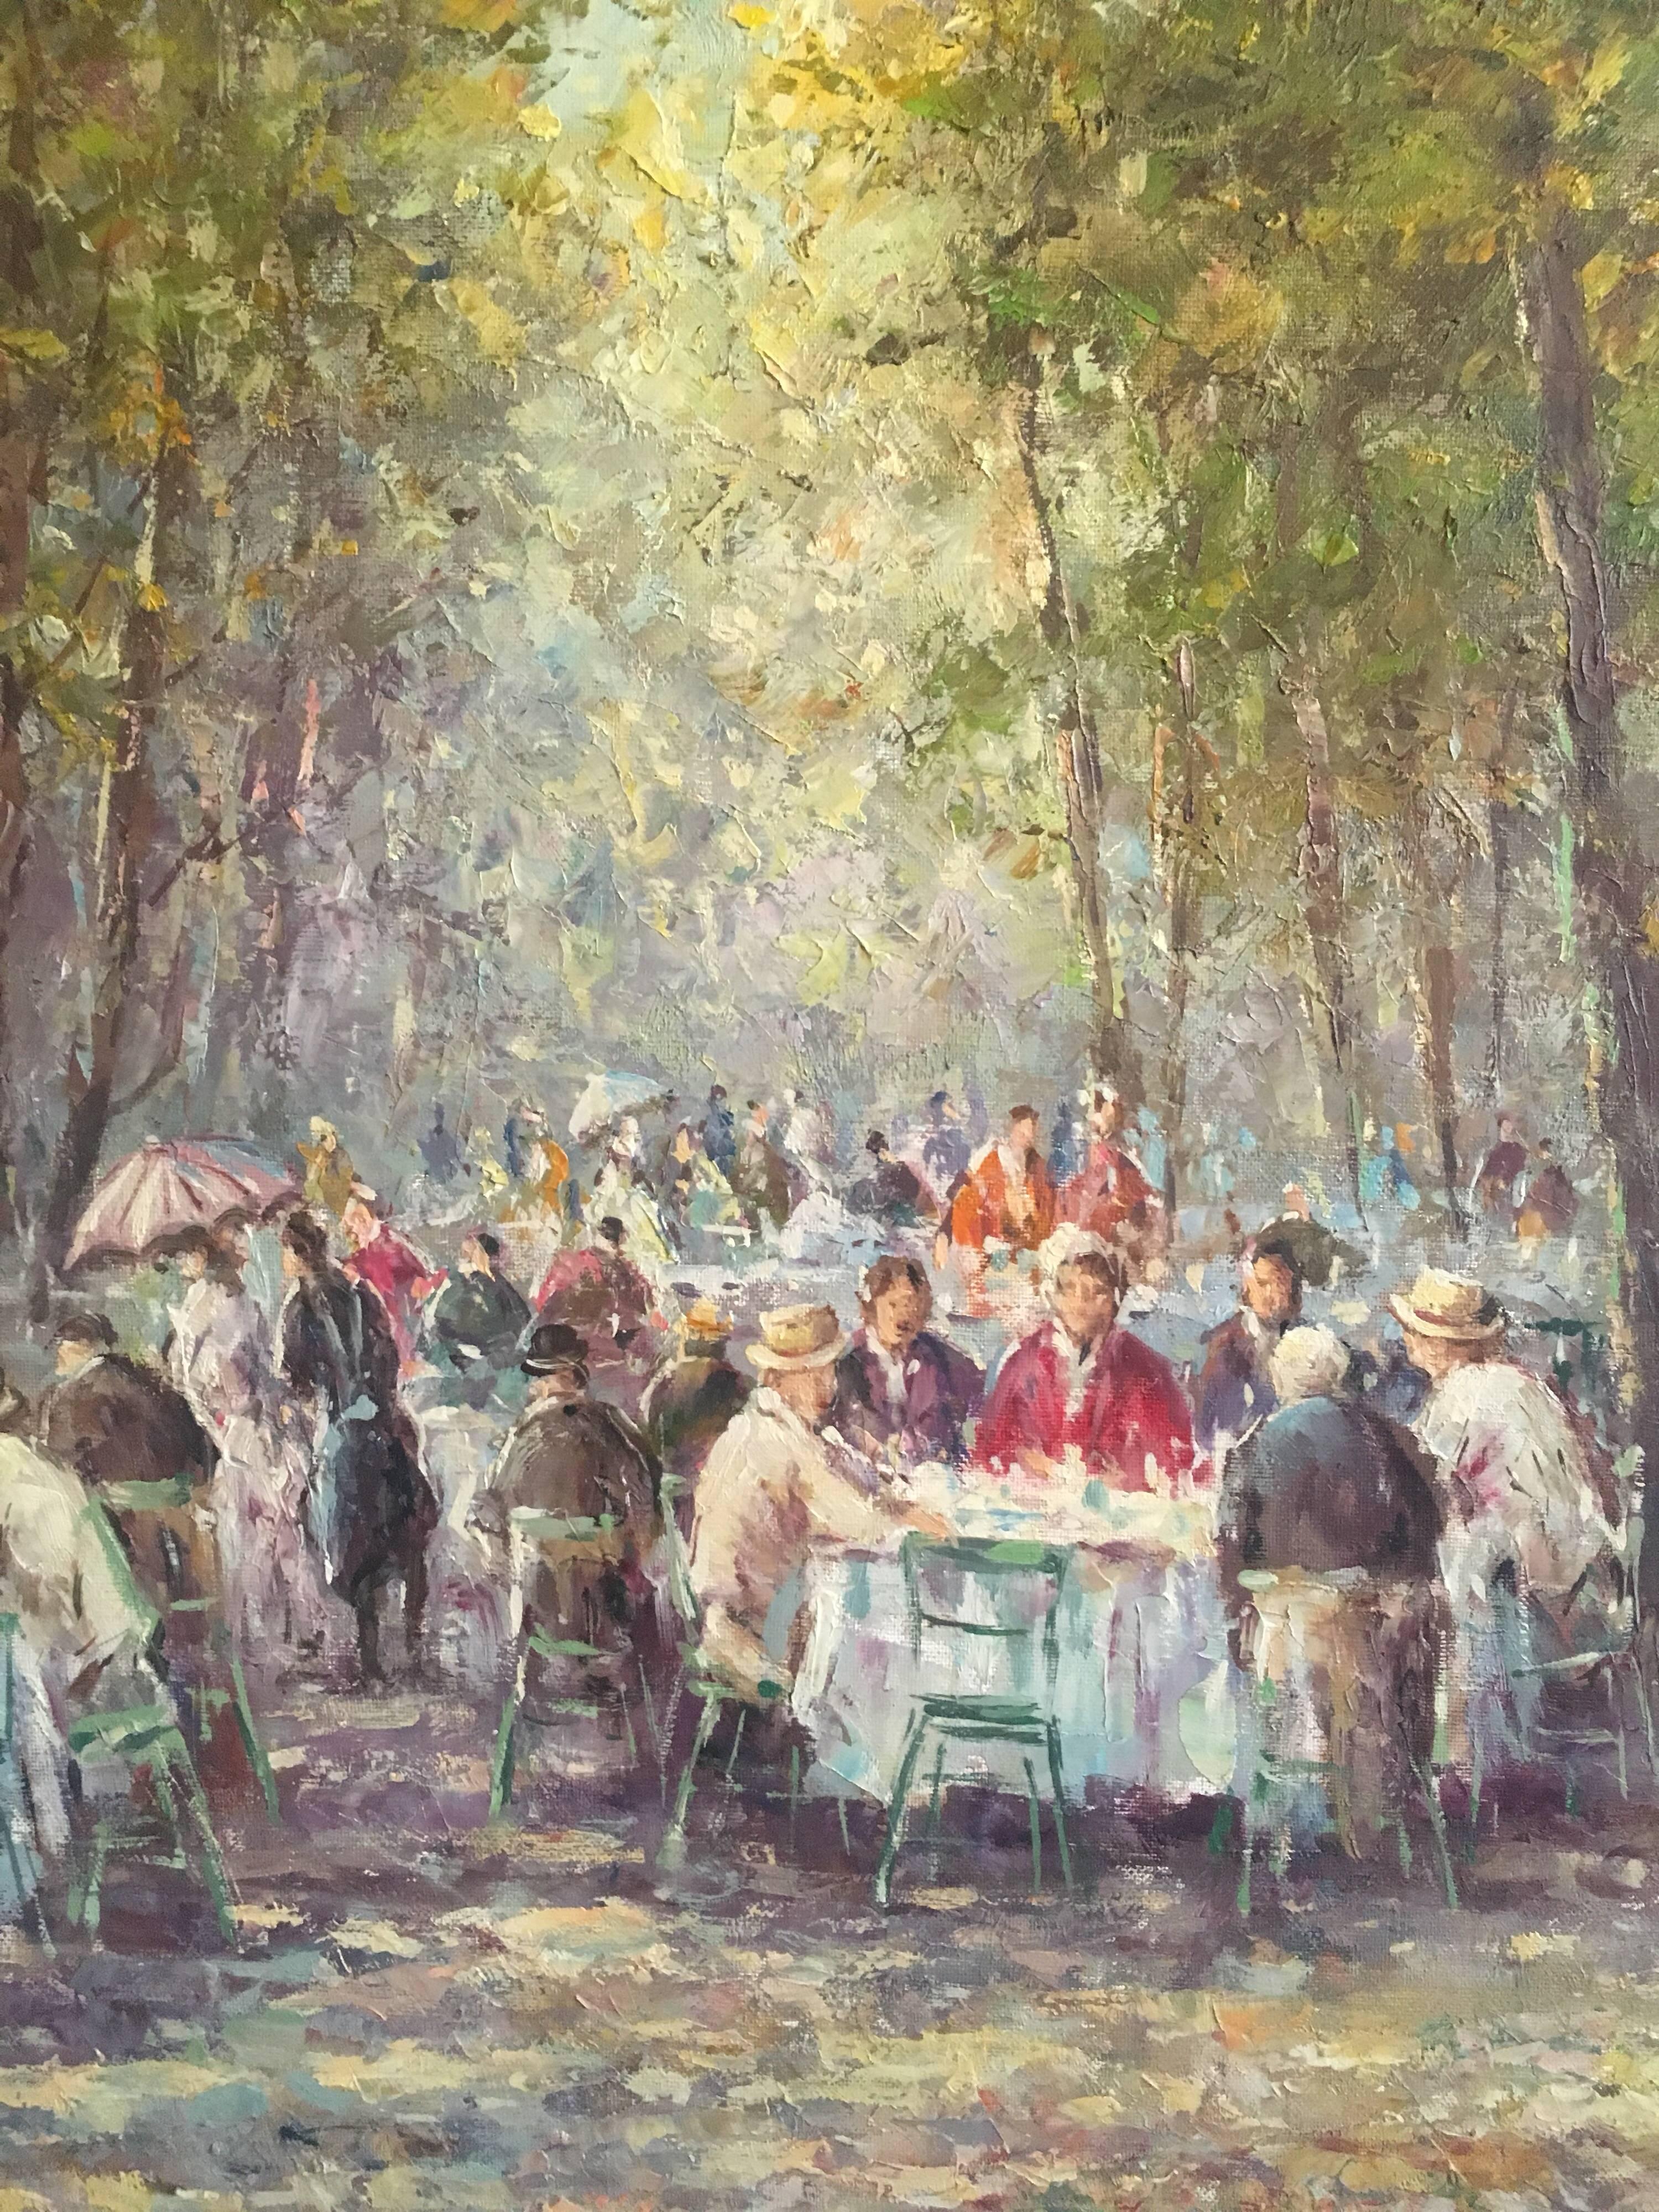 Figures in Busy Park Cafe
By artist H.Hartung, 20th Century
Oil painting on canvas, framed
Signed on the lower right hand corner
Framed size: 33 x 29 inches

Wonderful multi coloured scene of a bustling cafe in the middle of a park. The detail is